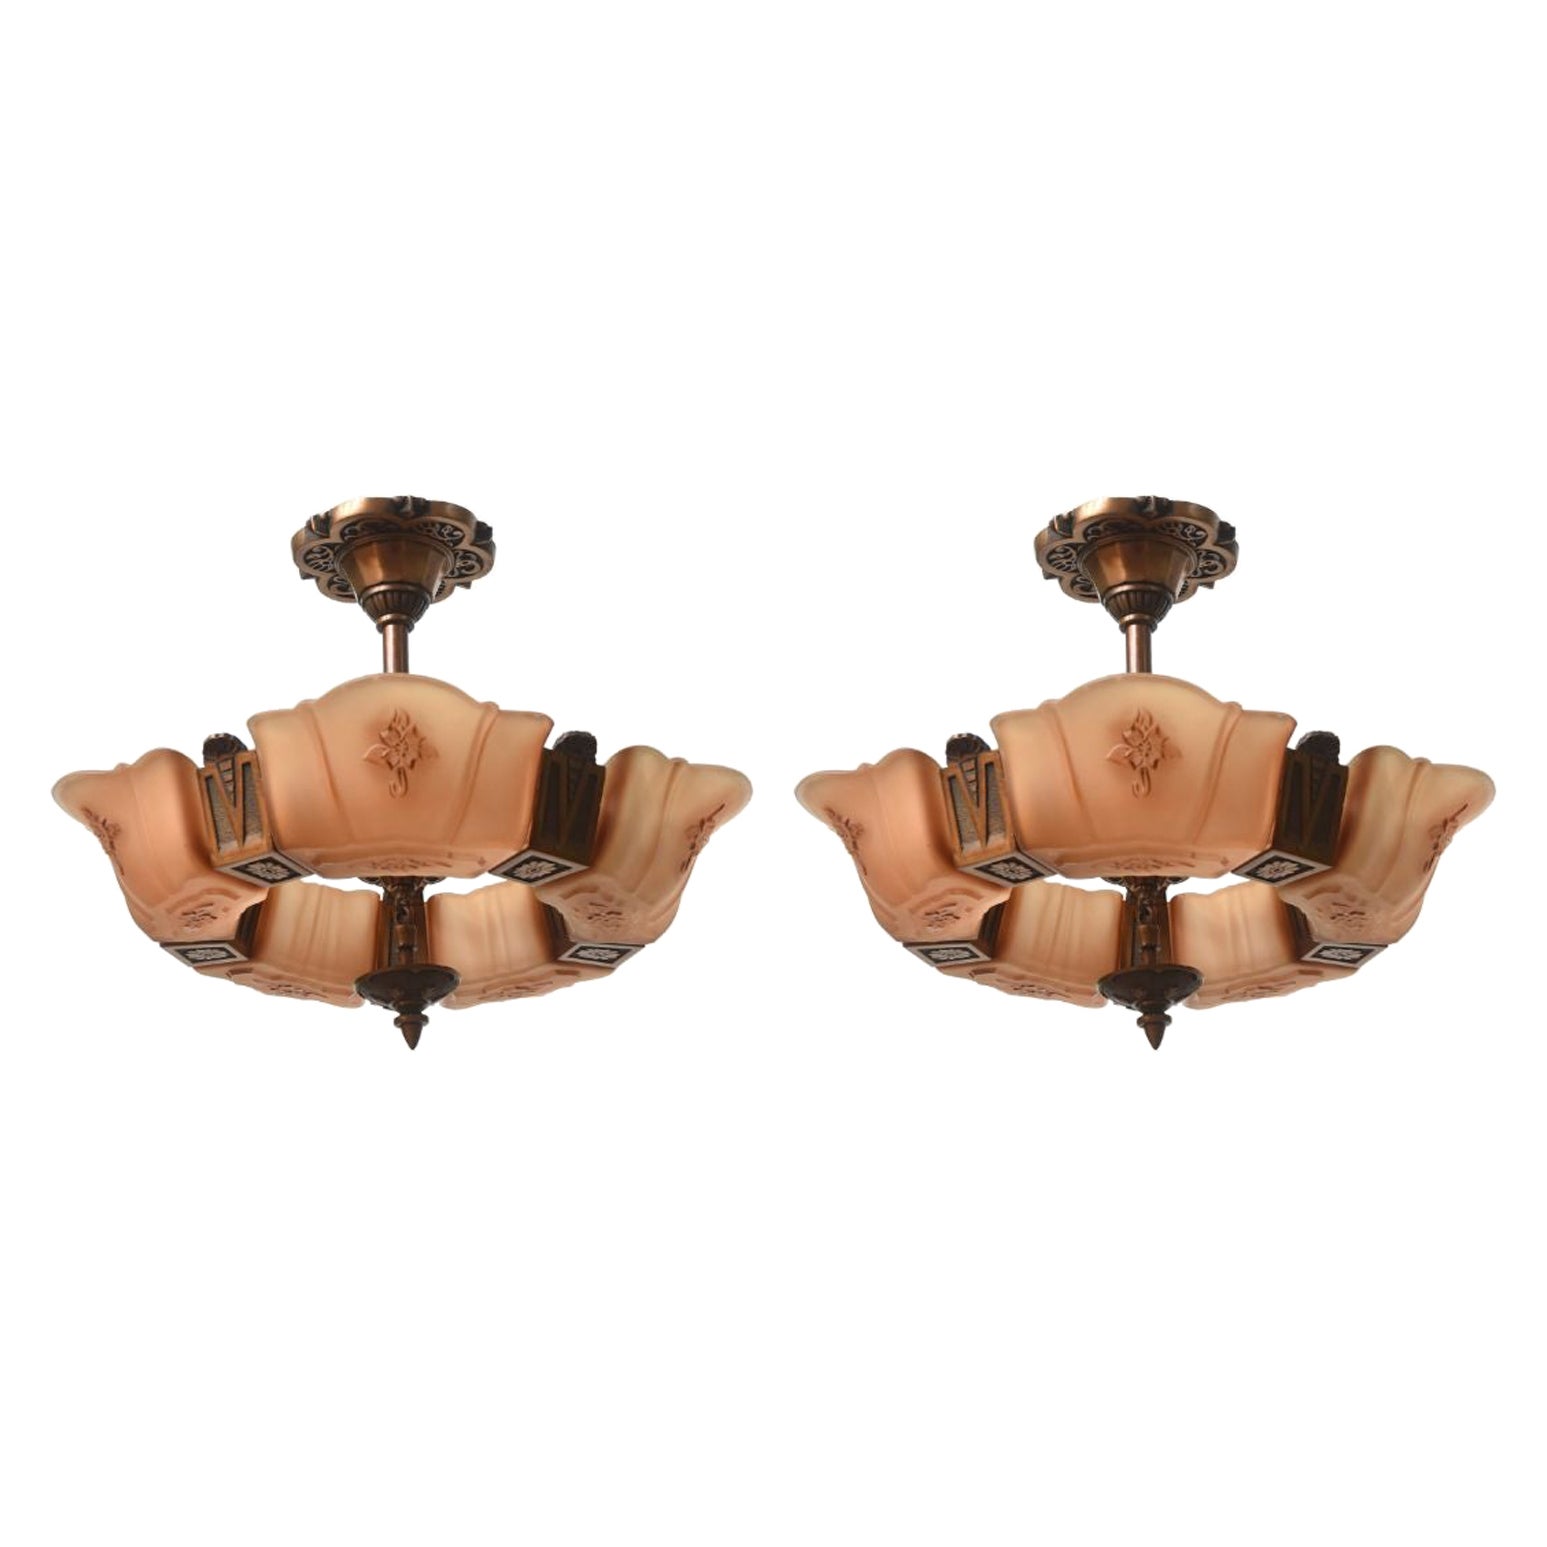 1930's Markel Art Deco Glass and Bronze Ceiling Fixtures, a Pair